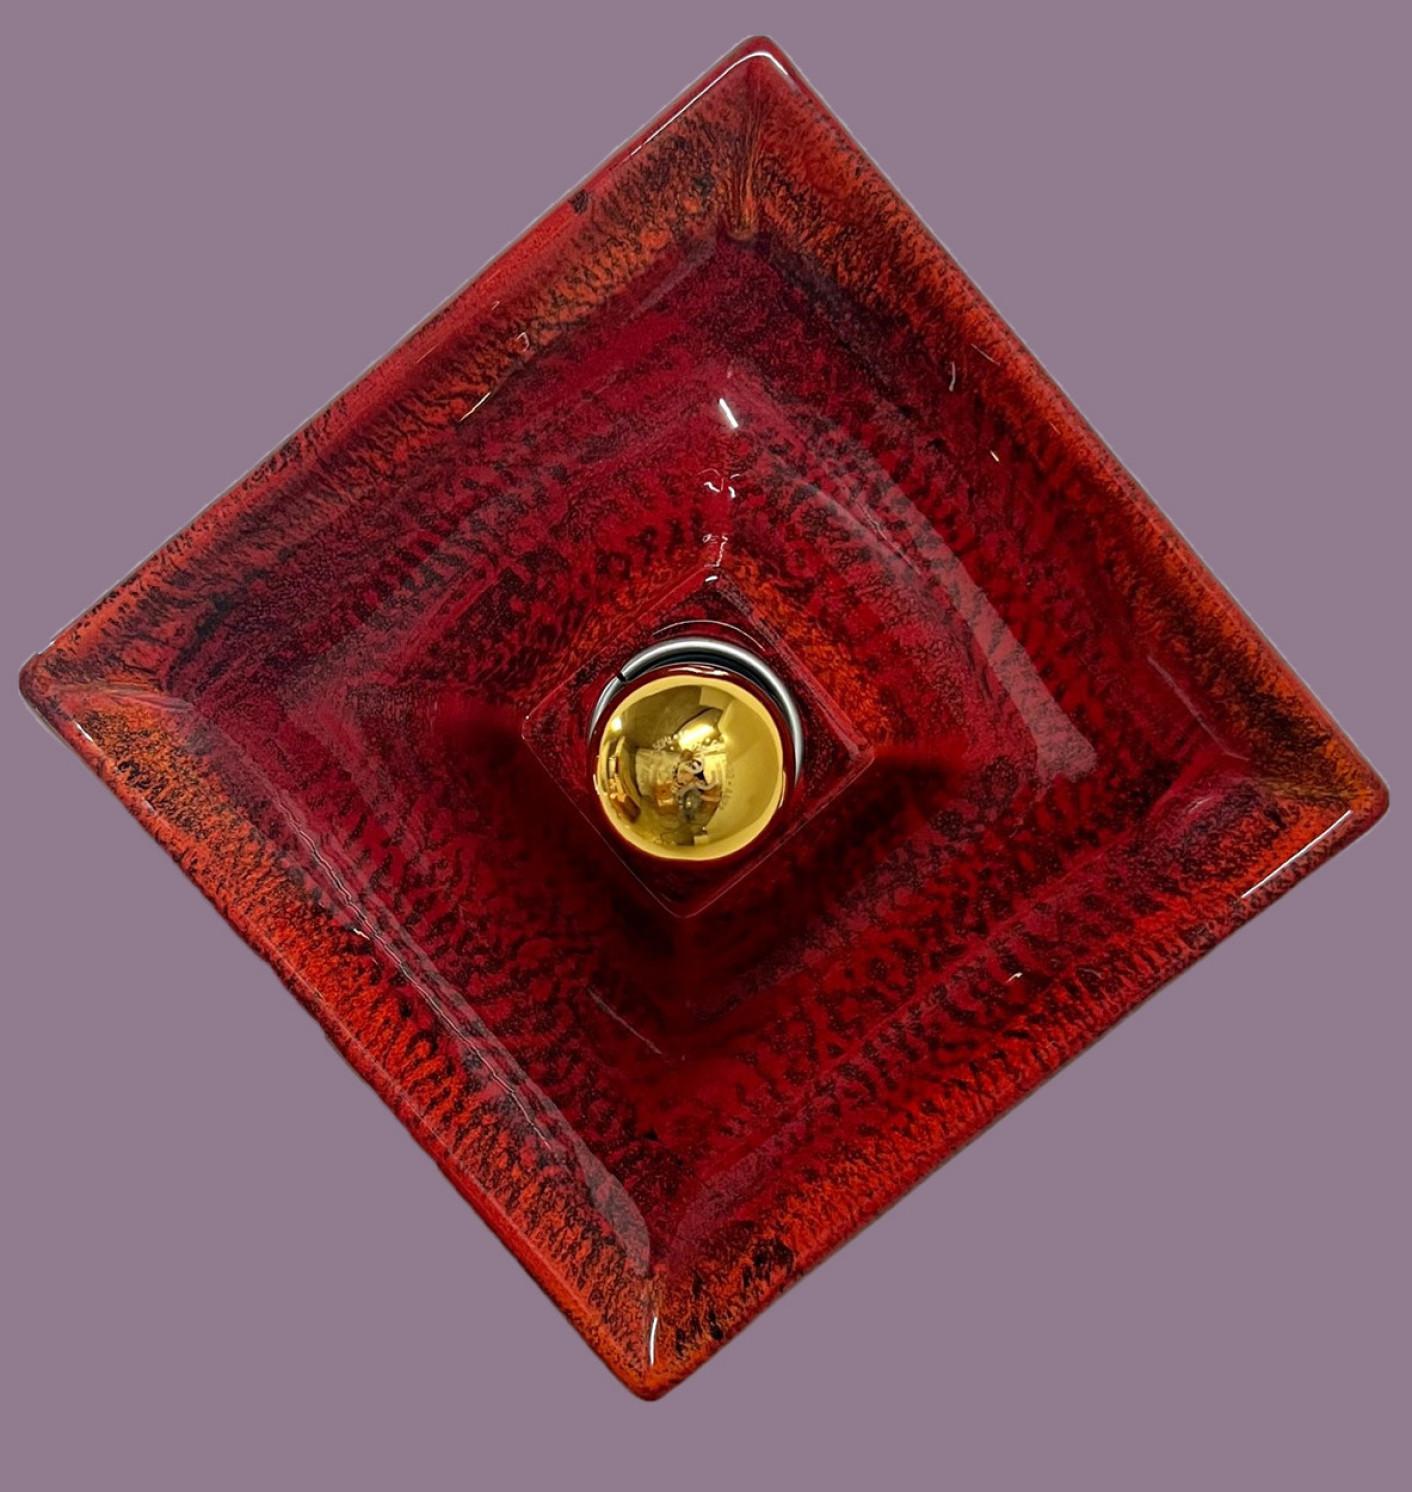 Red Square Ceramic Wall Lights by Hustadt Keramik, Germany, 1970 For Sale 5